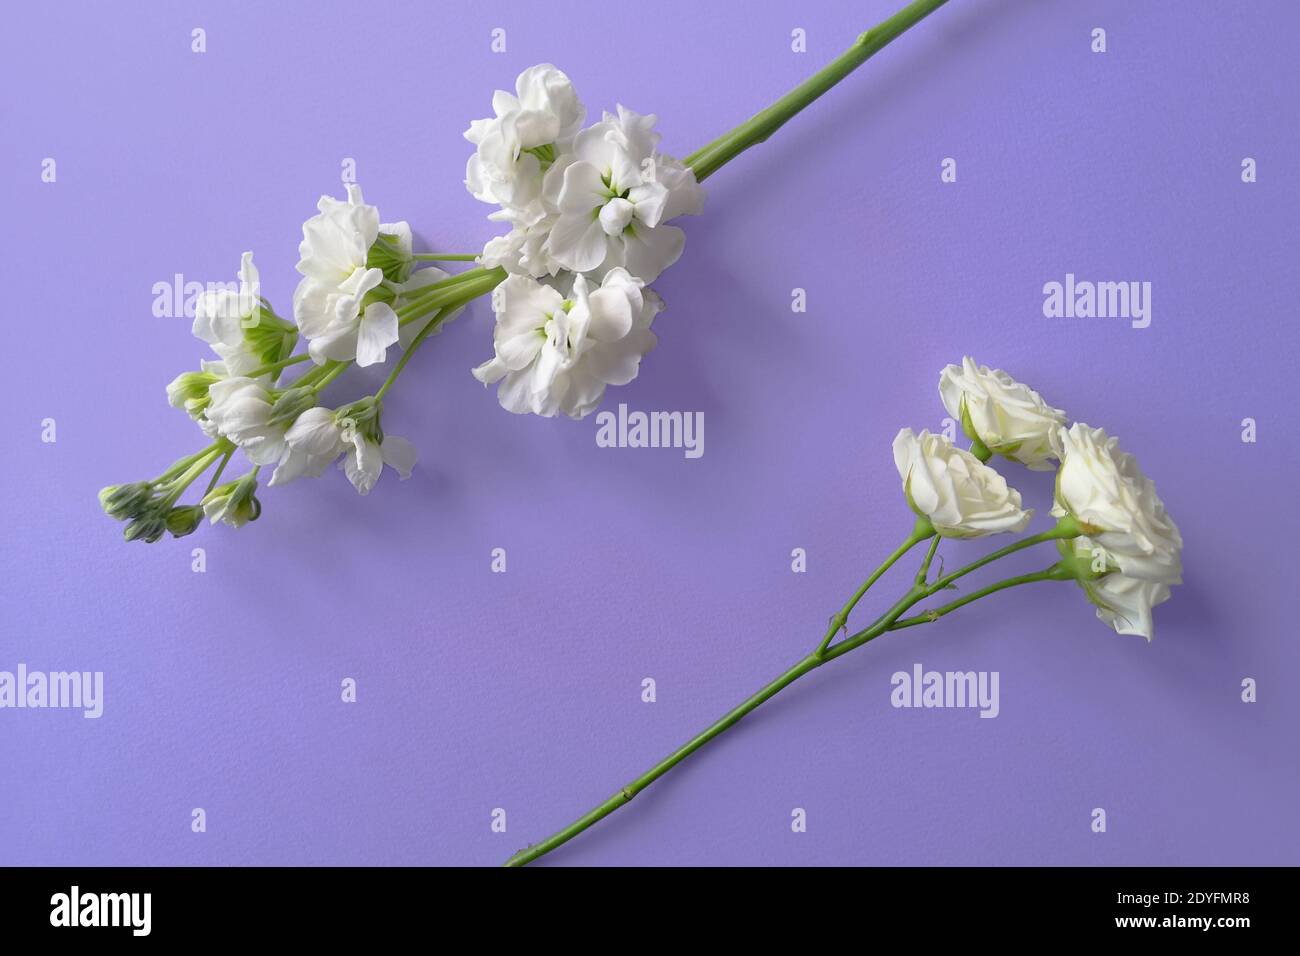 Top view of two white flowers on a lilac background. Flower frame. Life style Stock Photo